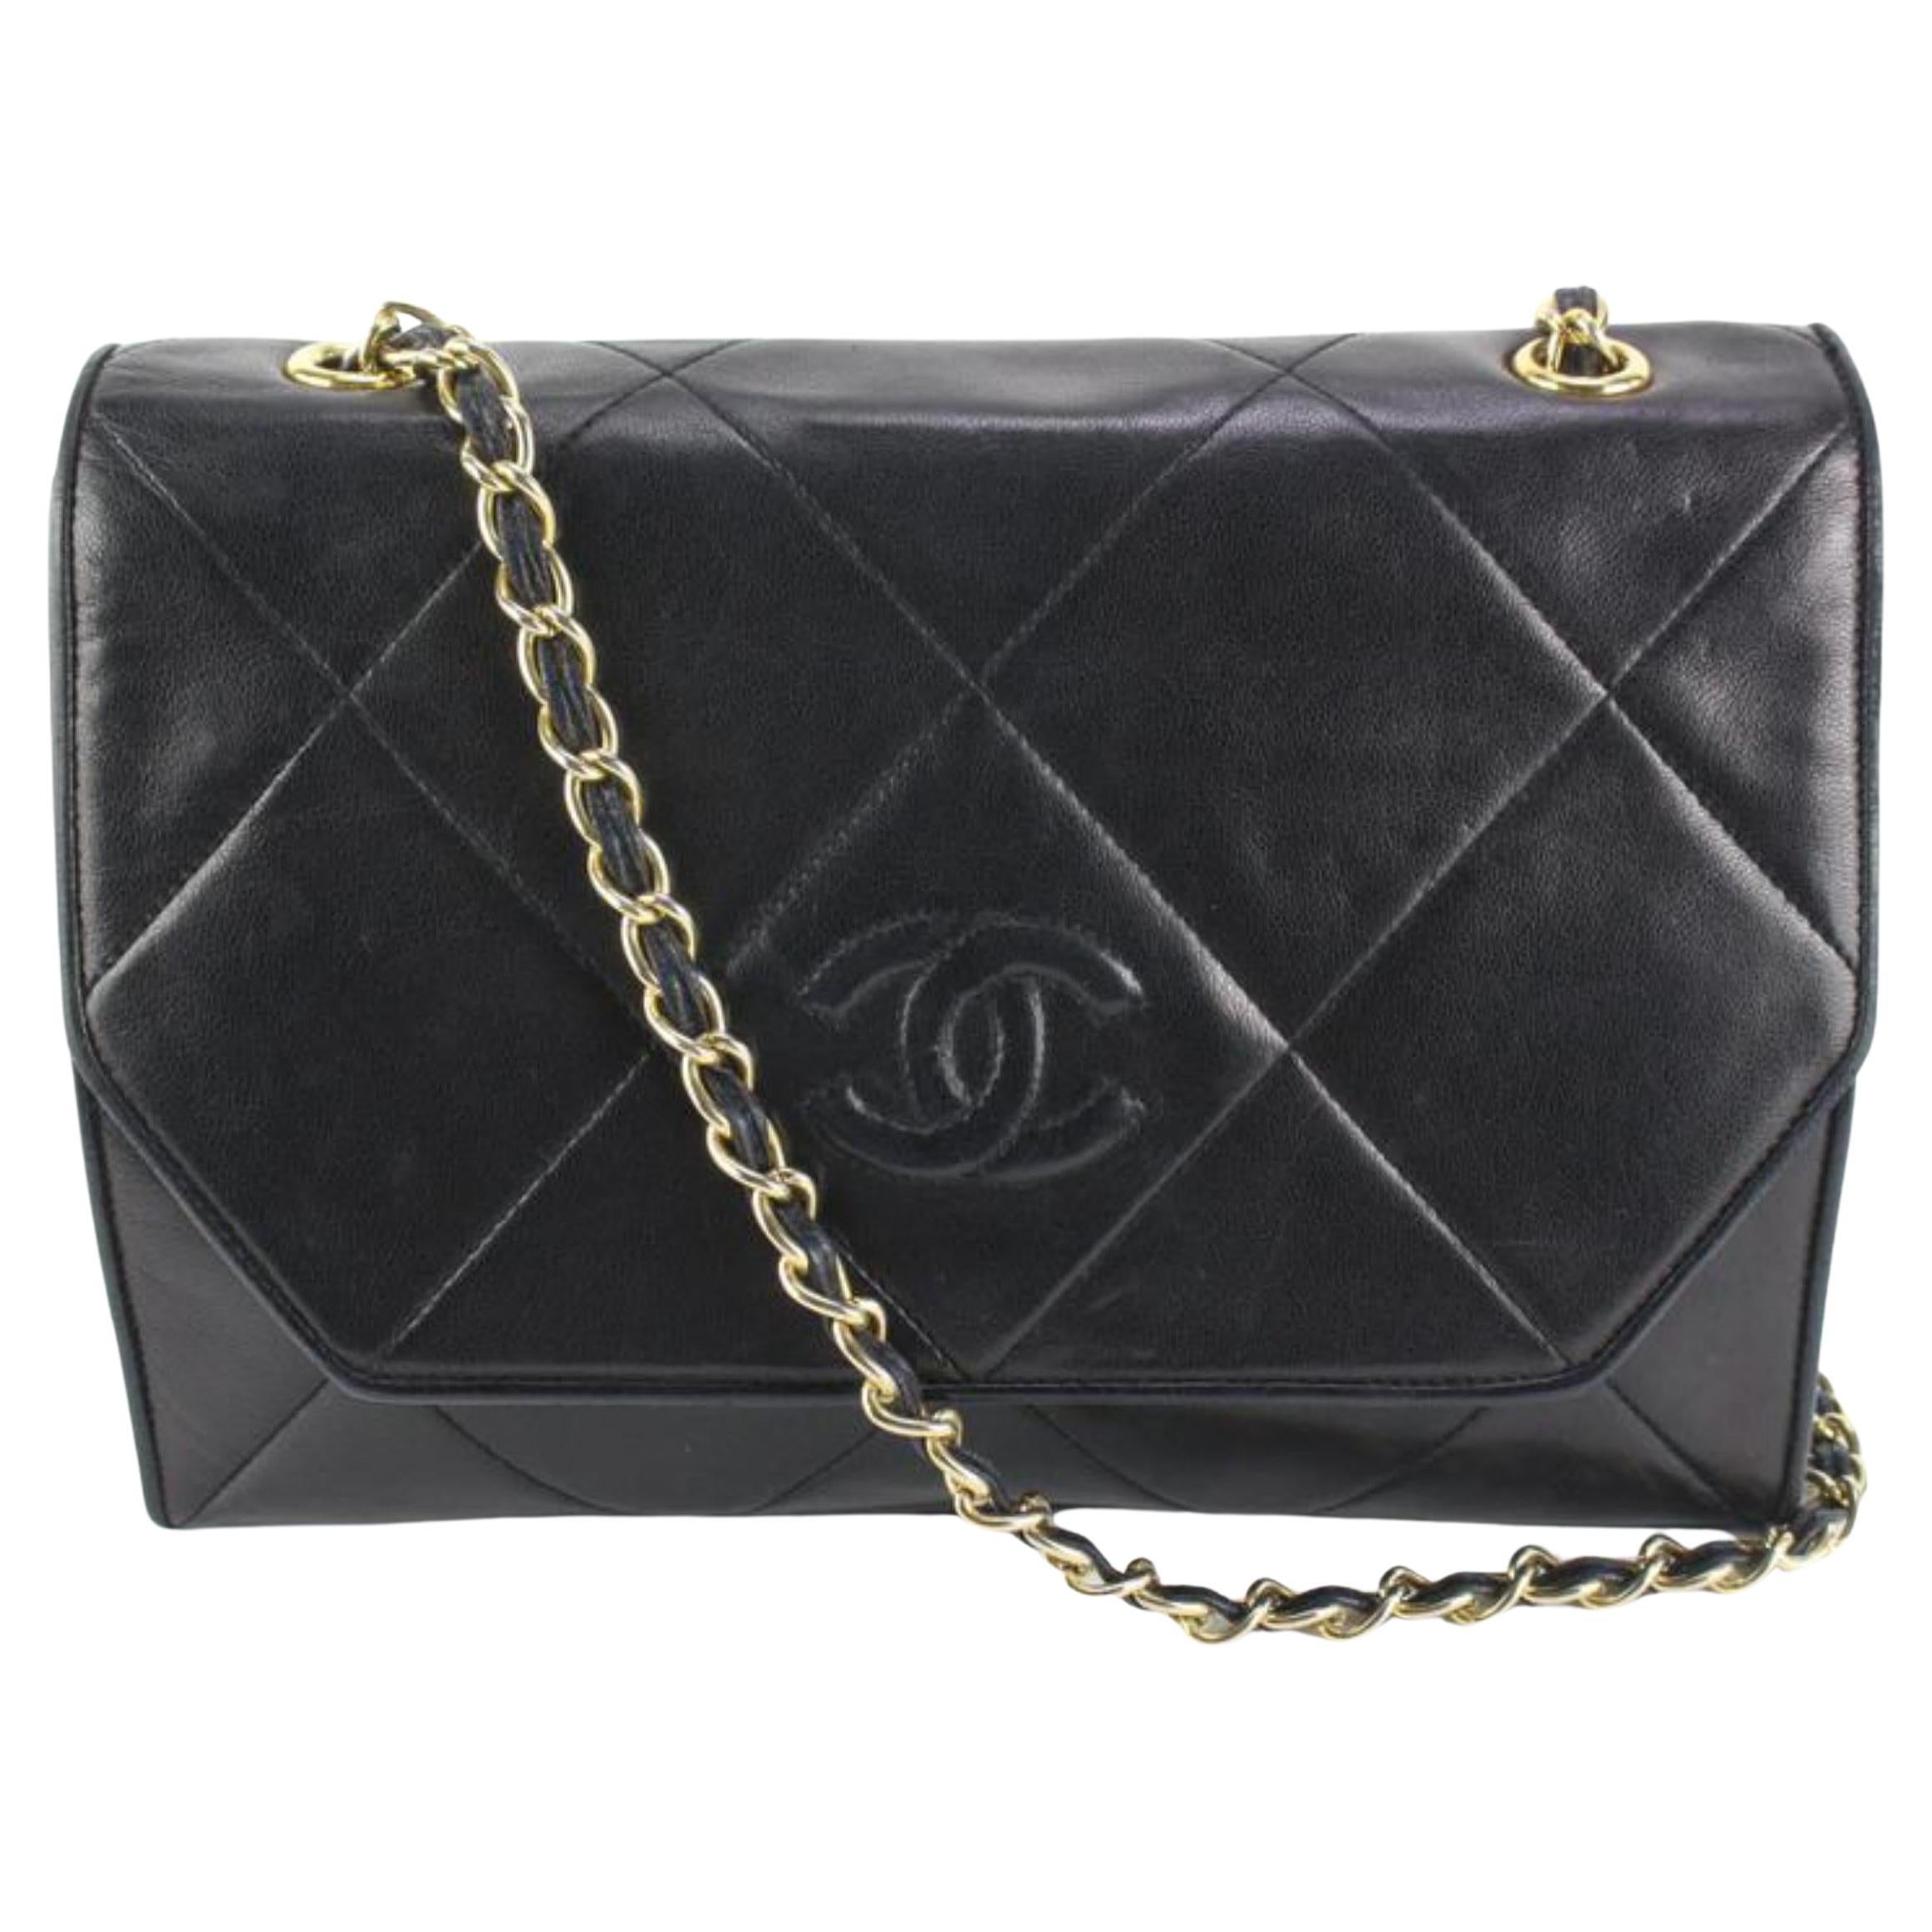 Chanel 19 Small Olive Green Mixed Hardware – Coco Approved Studio